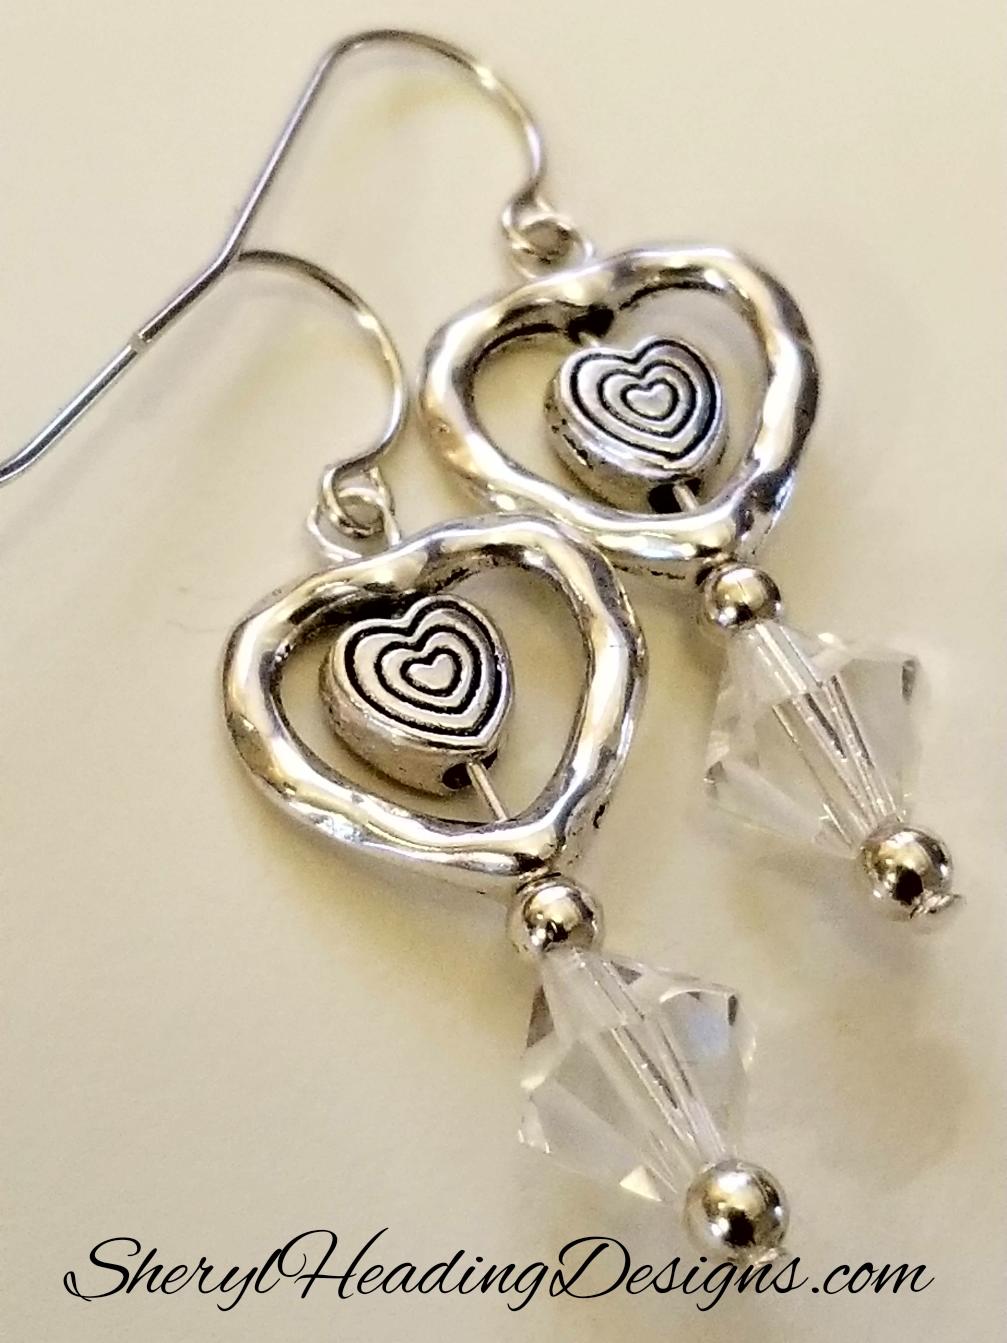 Just Love Em' Silver and Crystal Dangle Heart Earrings - Sheryl Heading Designs